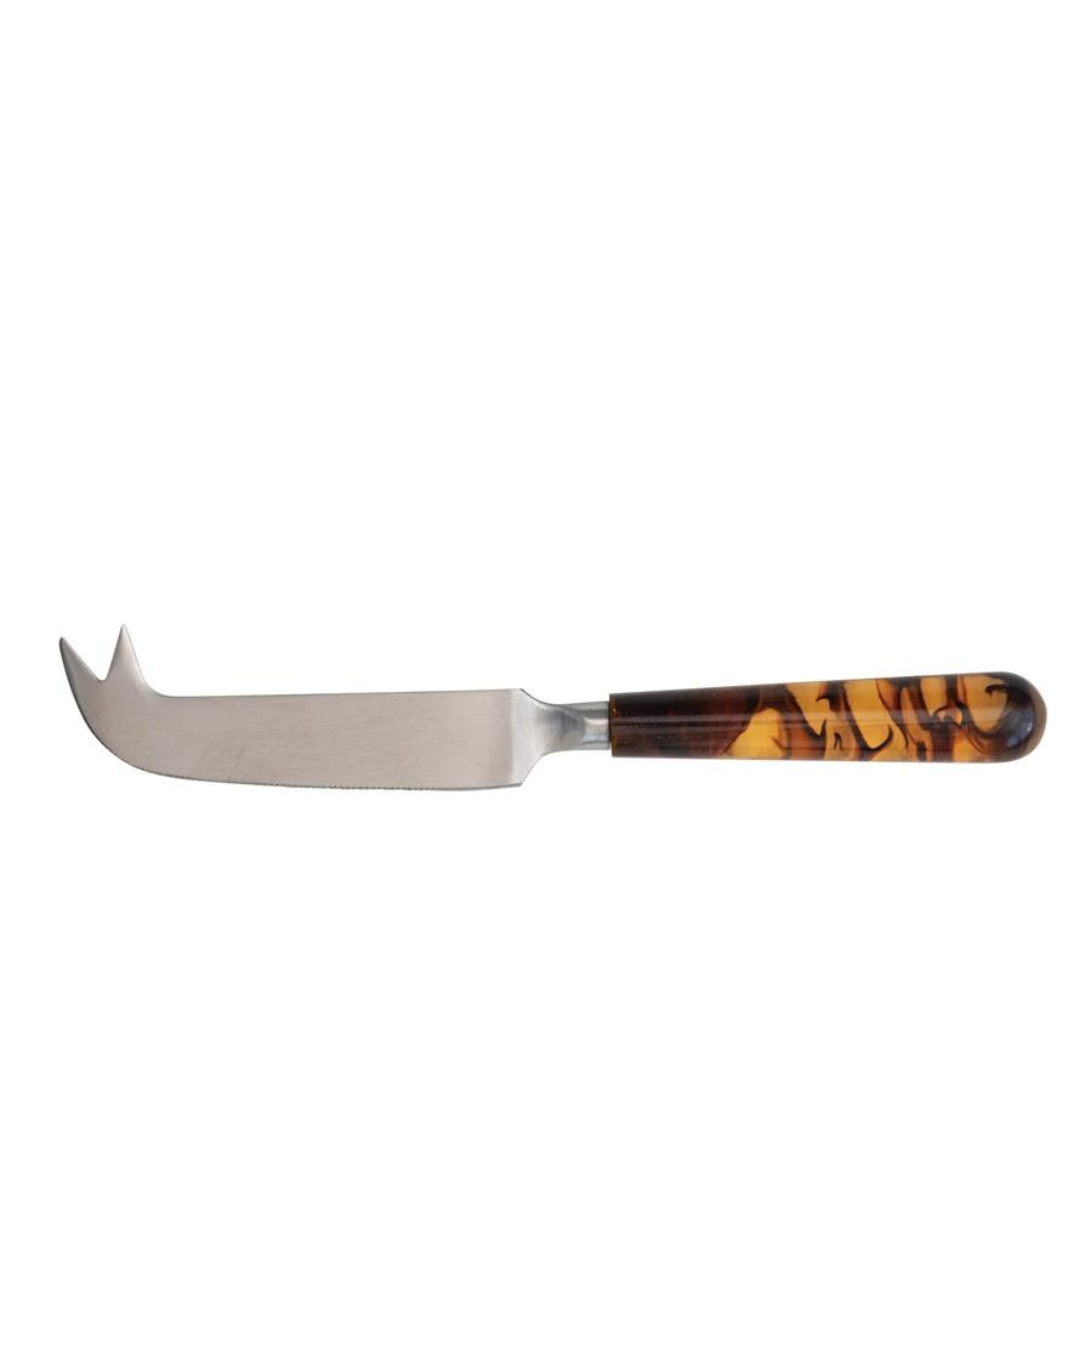 Stainless Steel Cheese Knife w/ Resin Handle, Tortoise Shell Finish